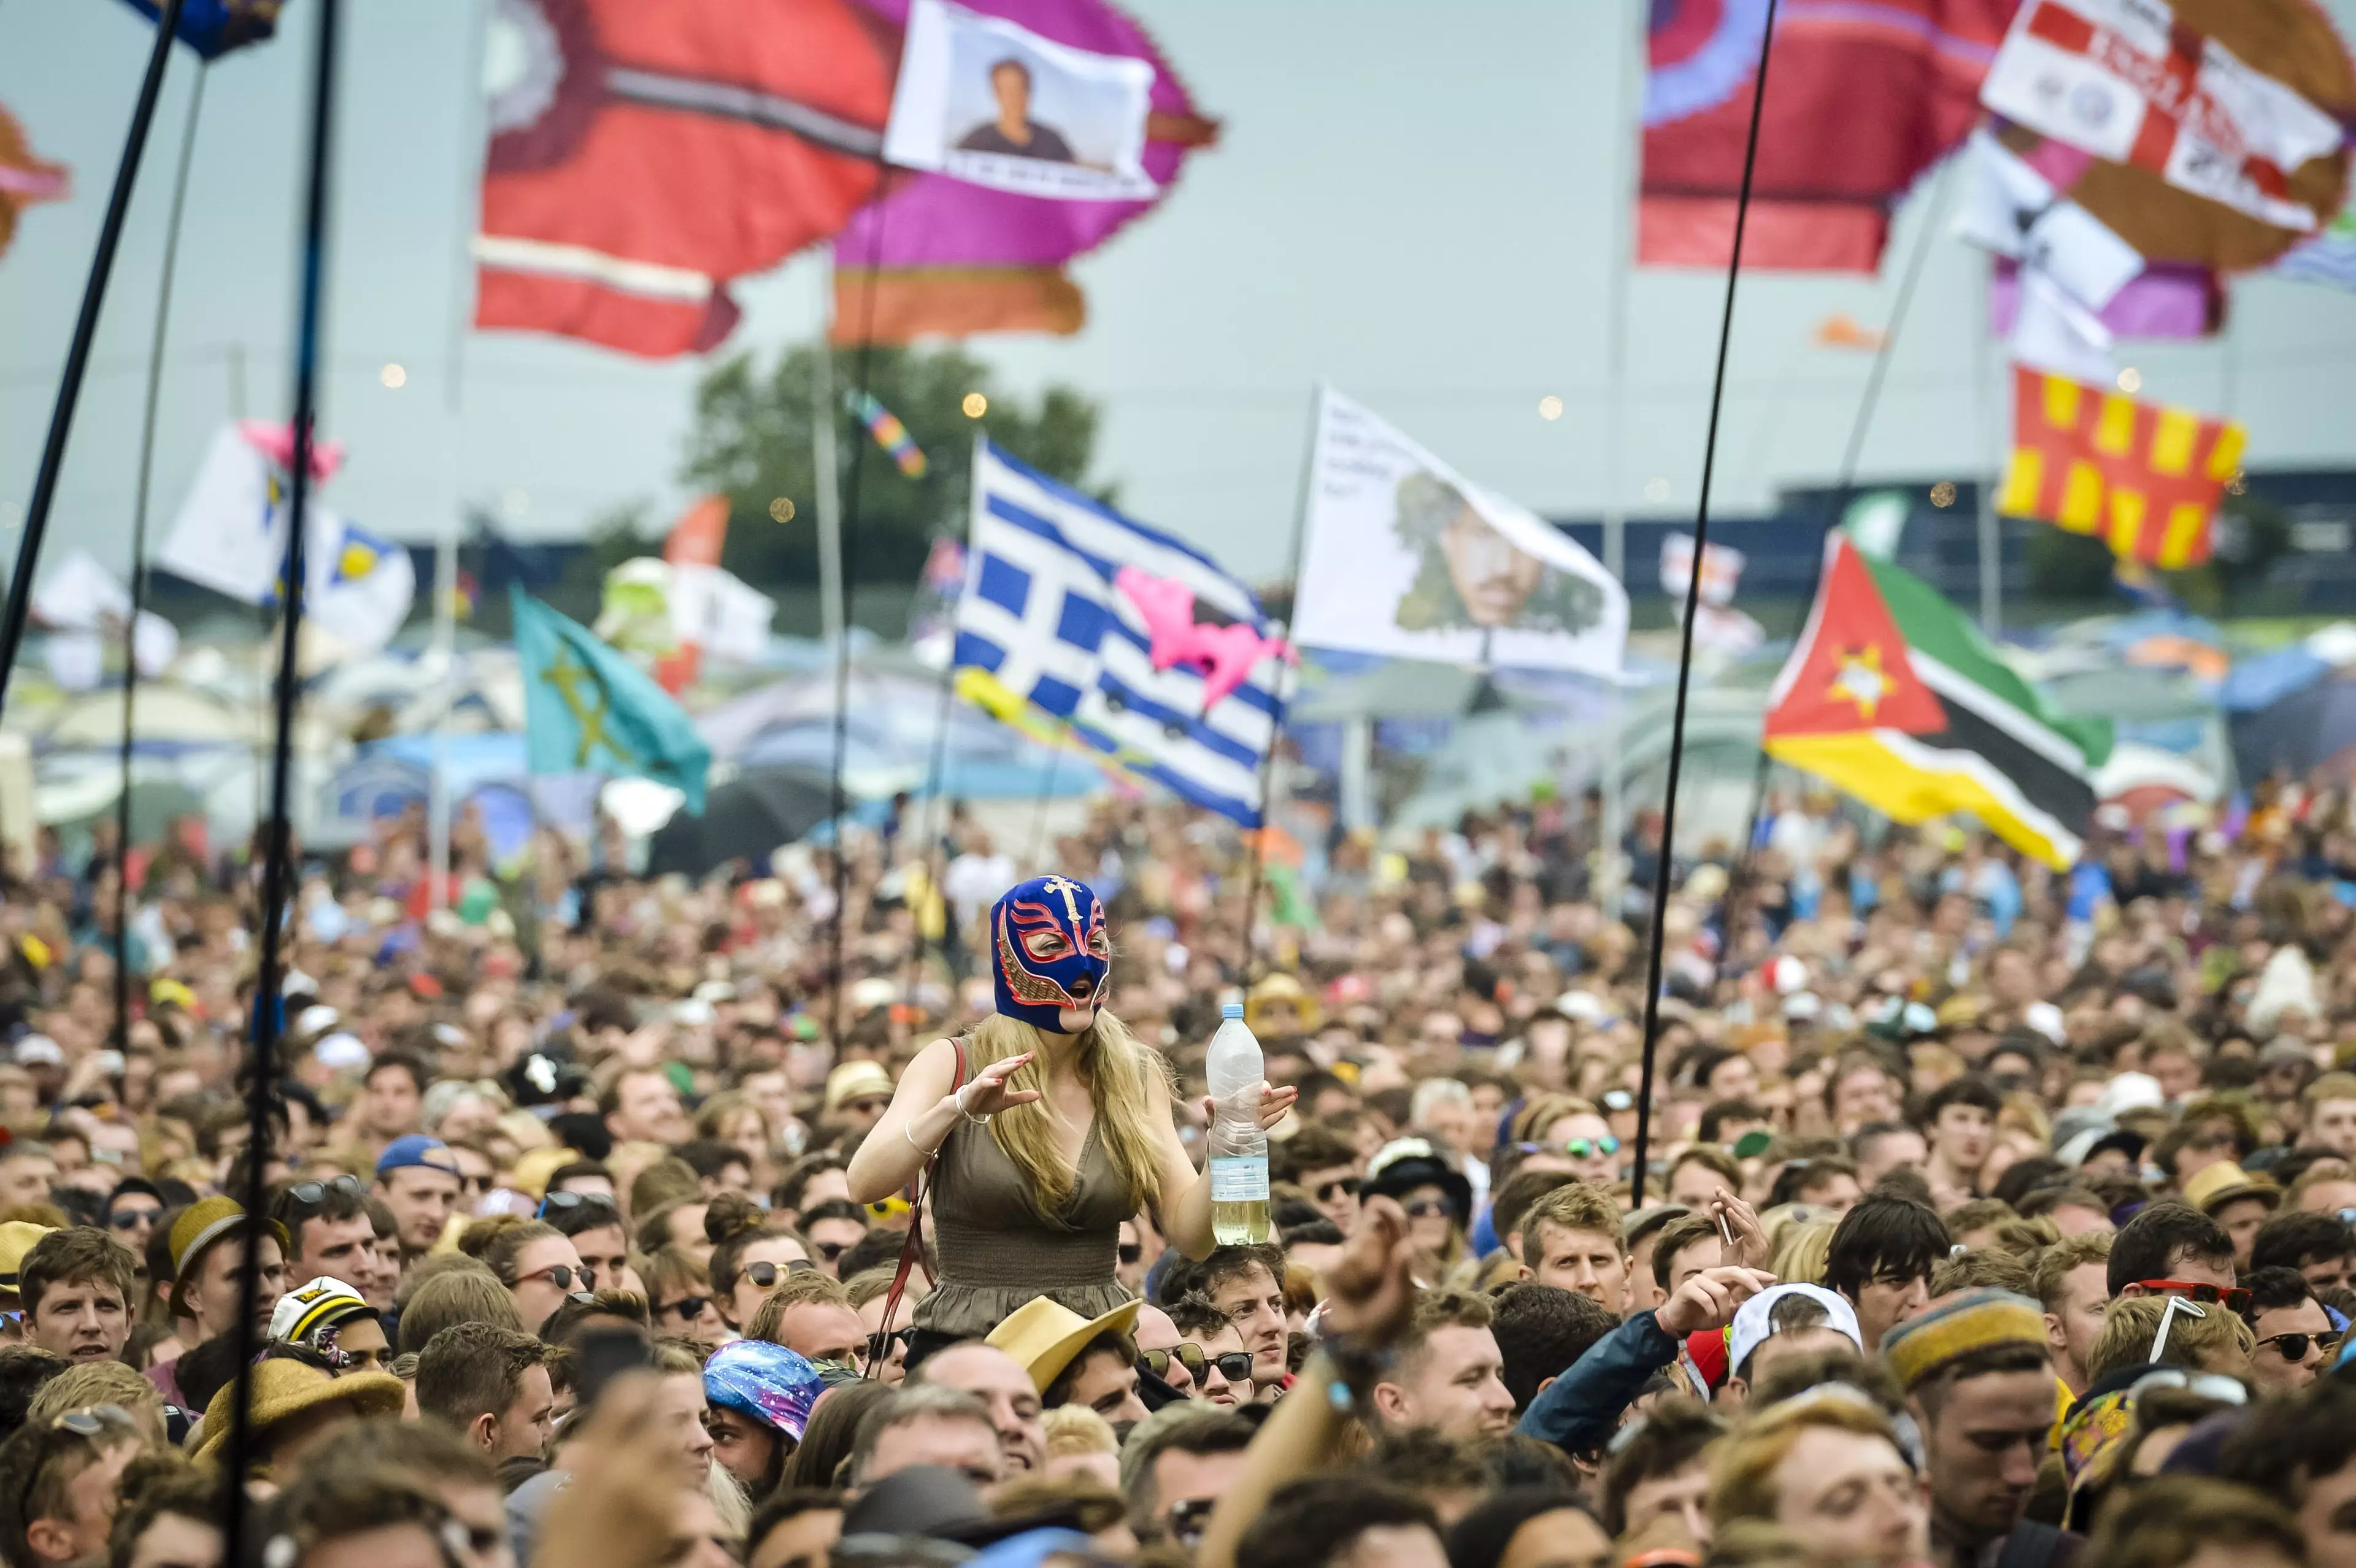 A licence for a one-day music event at the festival site in September has been approved (